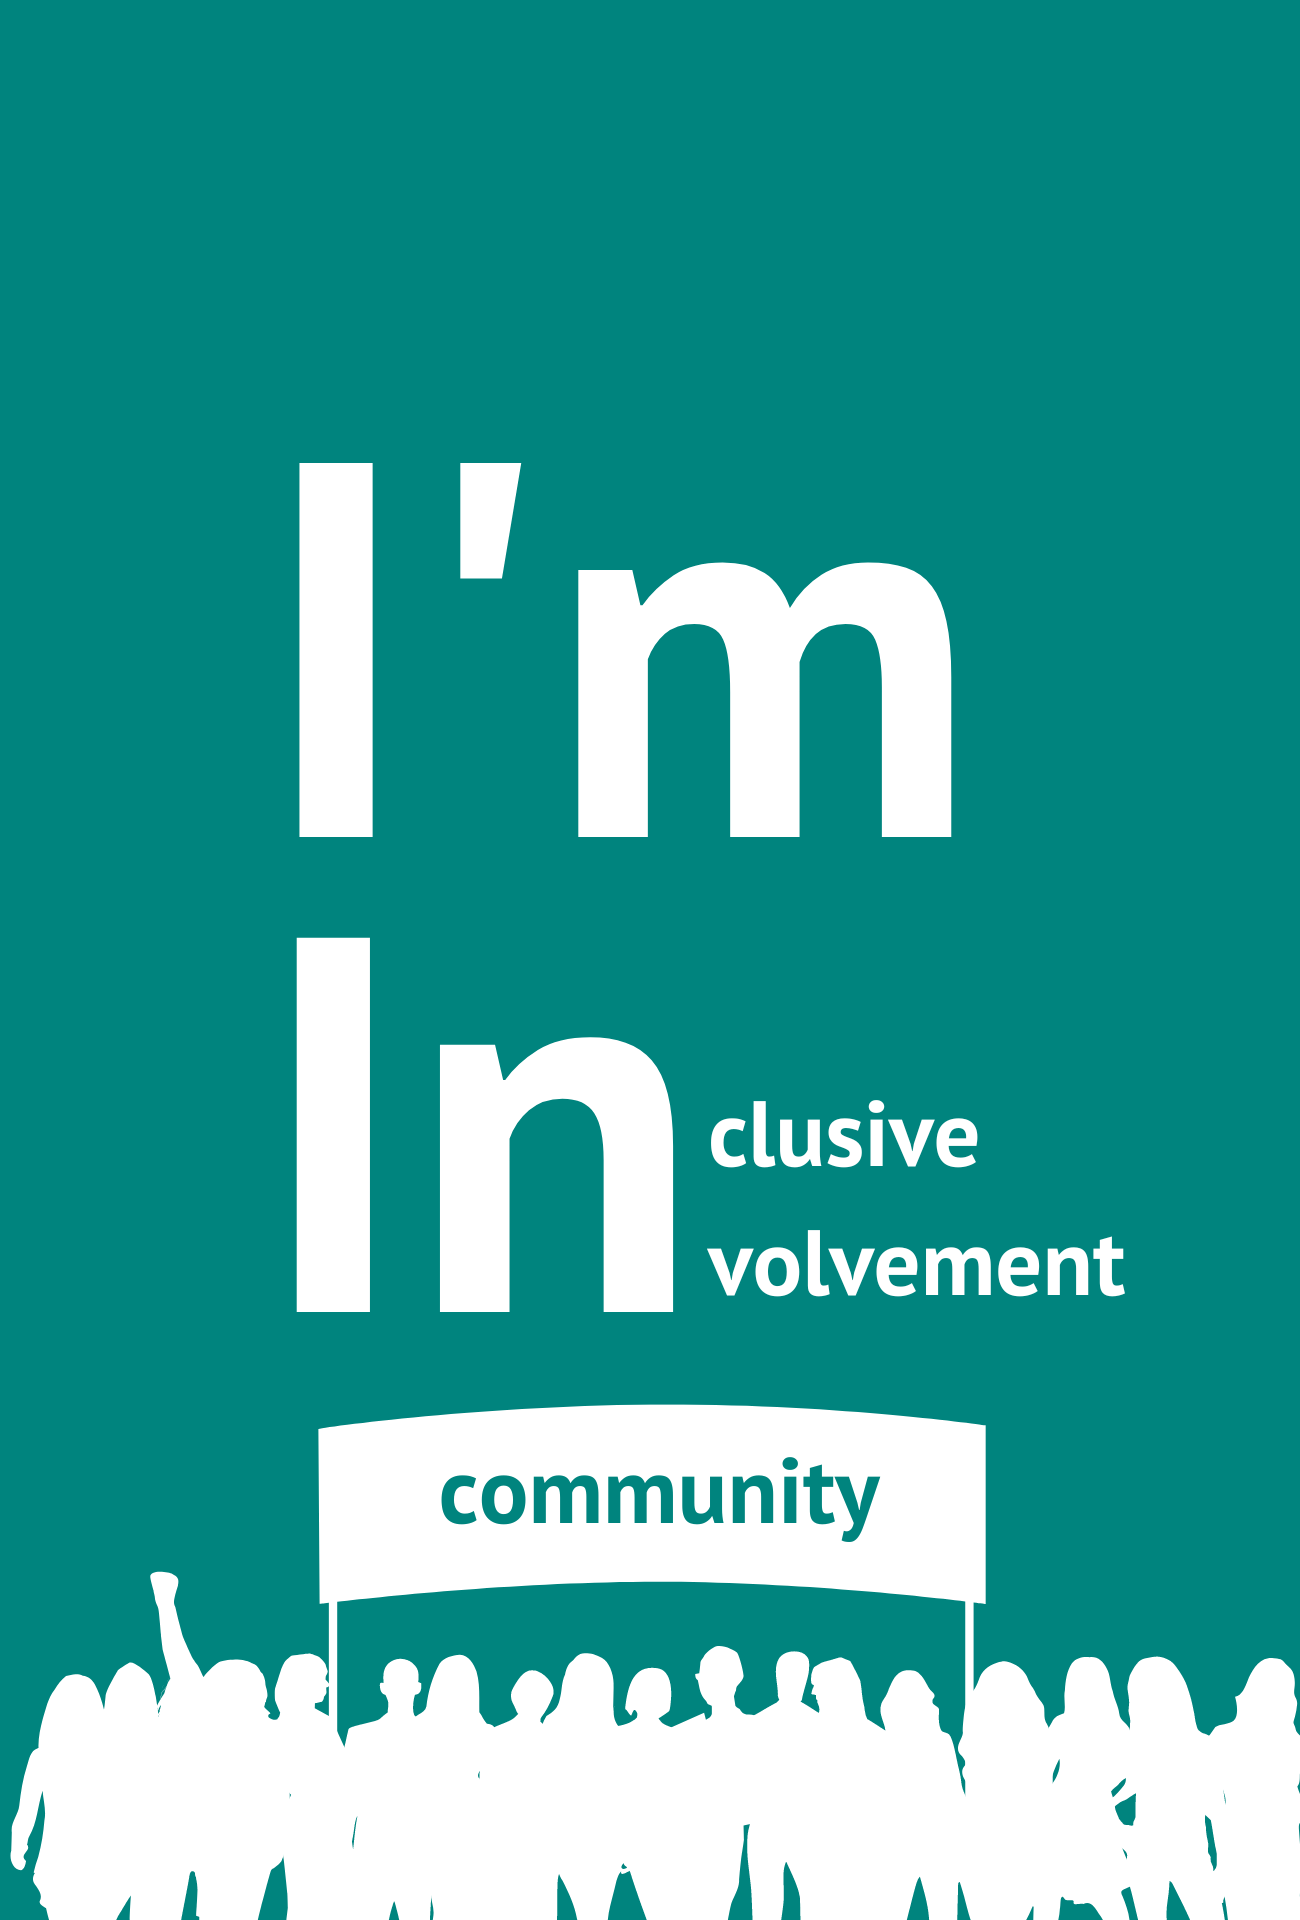 Turquoise background with large white letters: I'm In. There are two small words next to the In - "clusive" and "volvement". Underneath there is a group of people, silhouetted in white, holding a banner, on which is the word "community" in turquoise. 